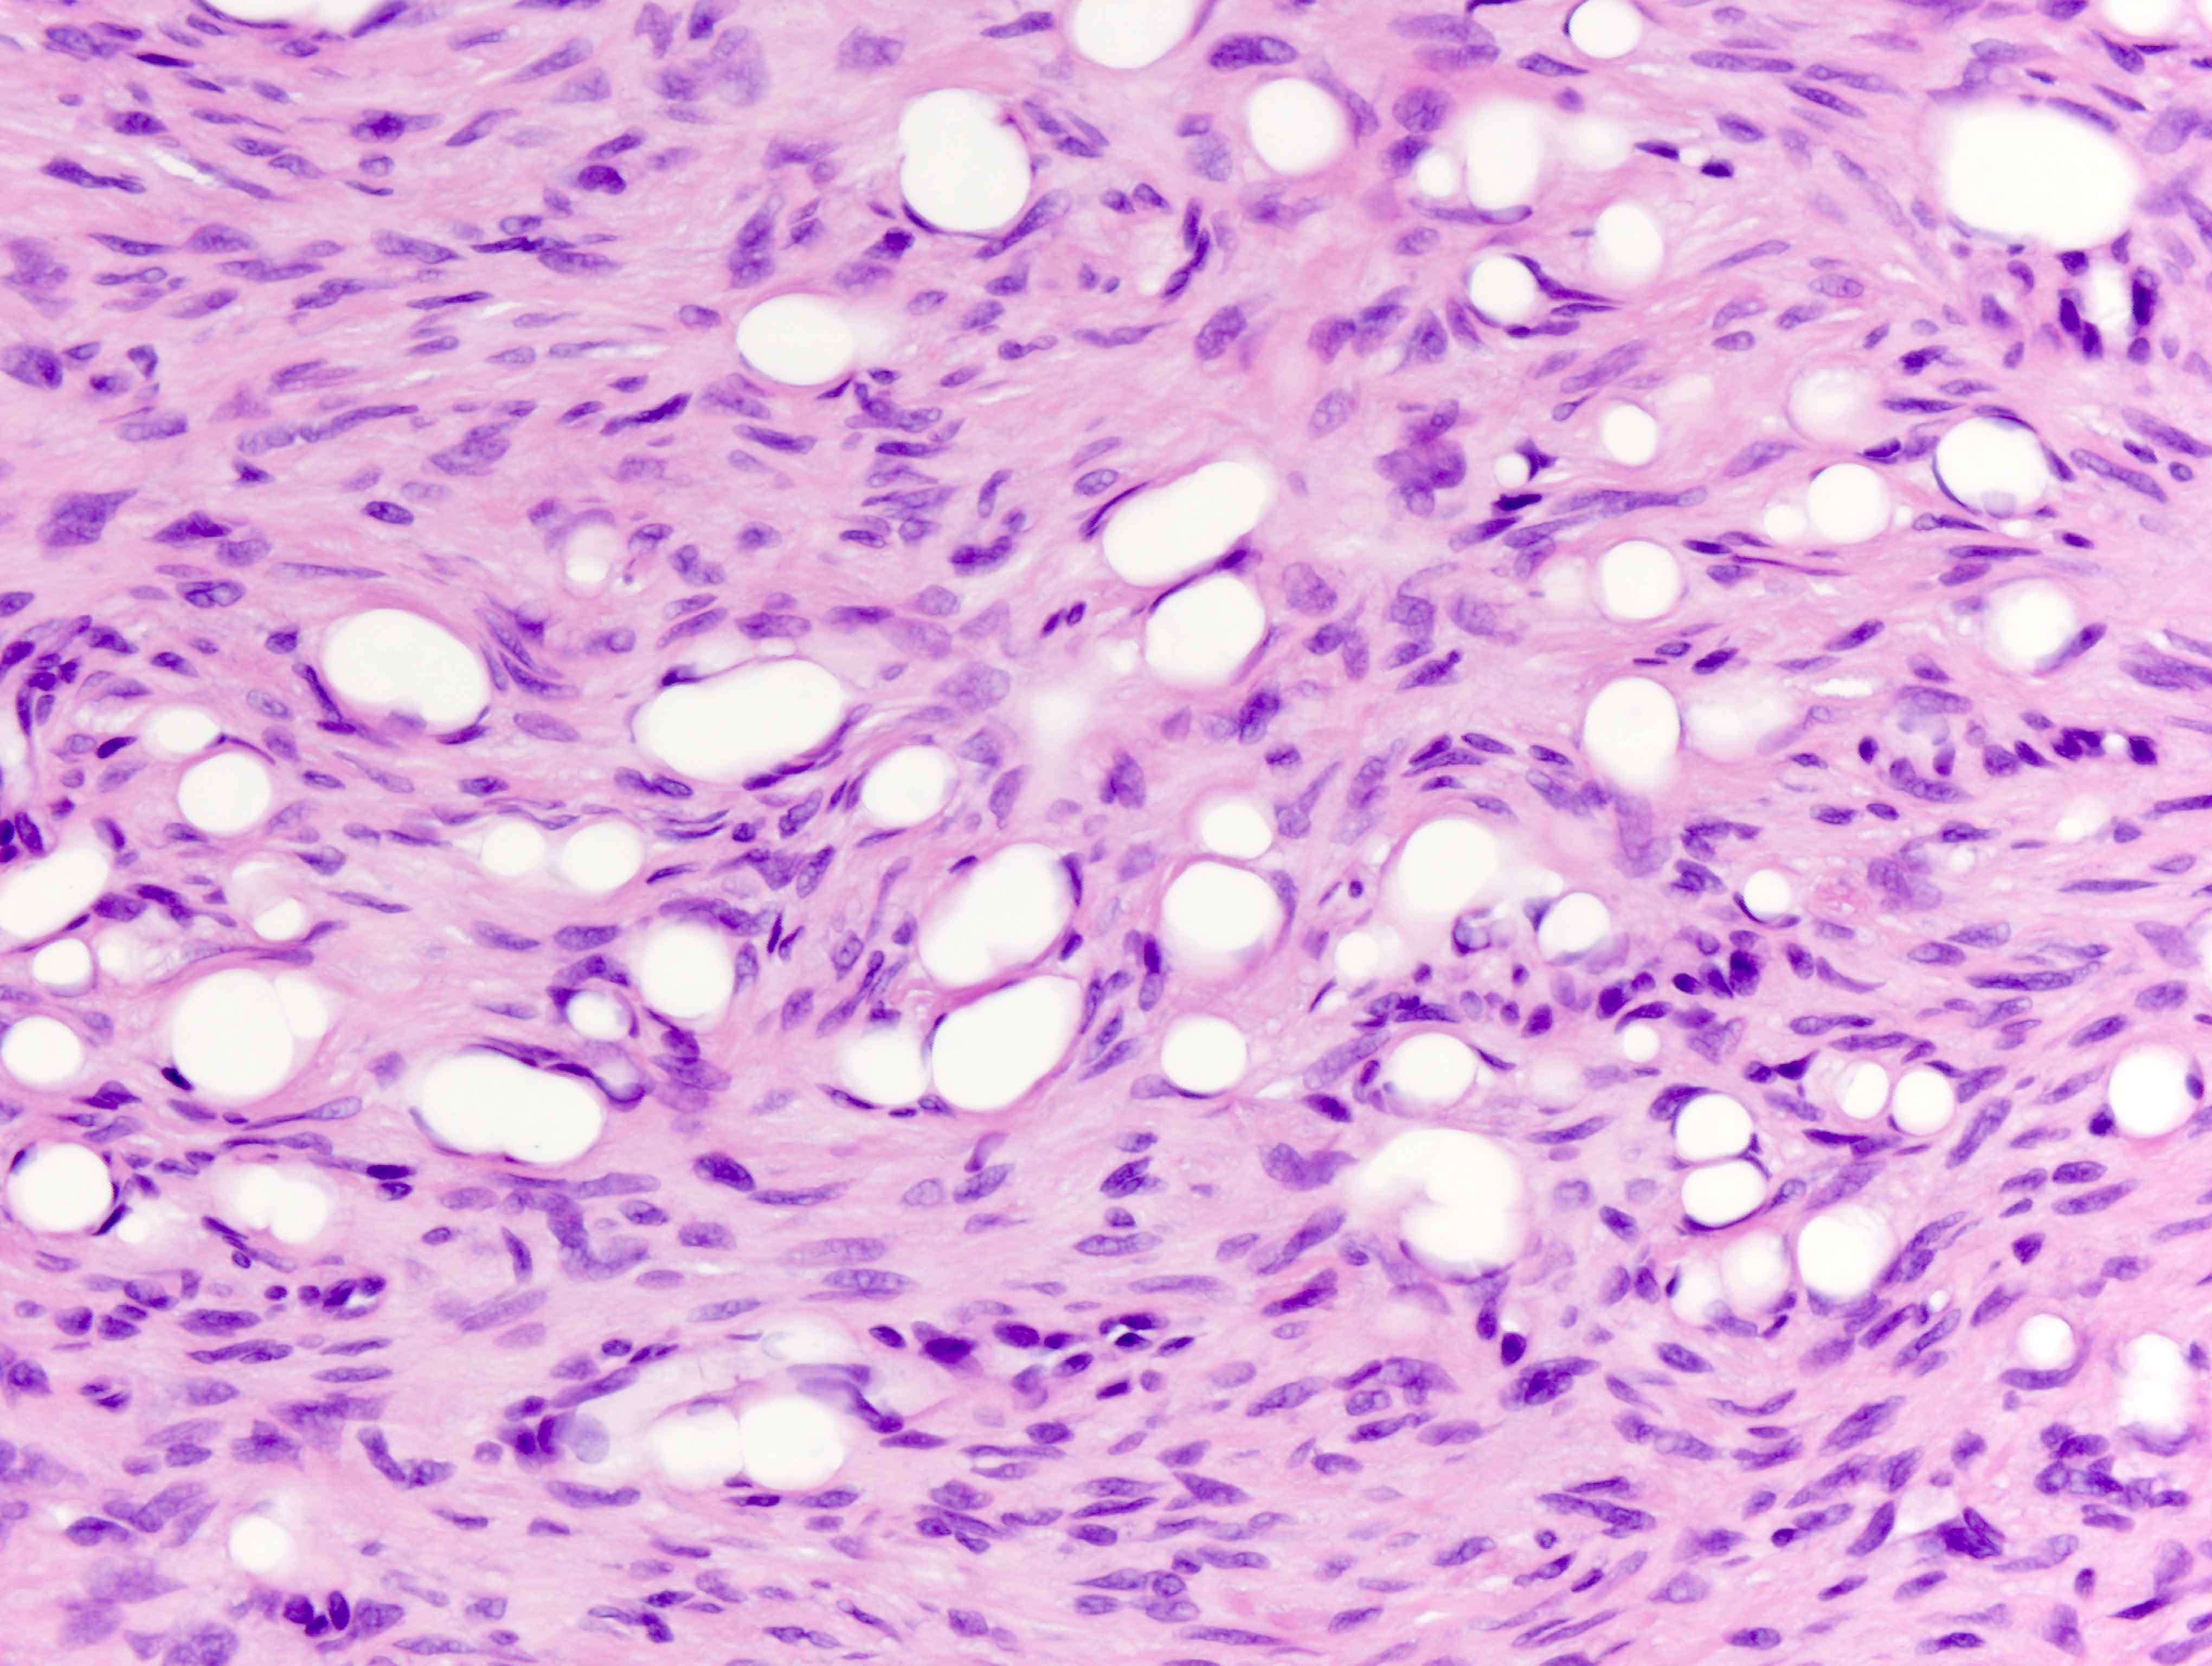 Slide 4: Cytomorphologically the cells are monomorphic appearing spindled with scant eosinophilic cytoplasm and hyperchromatic nuclei. There is minimal pleomorphism.  No significant mitoses are identified.